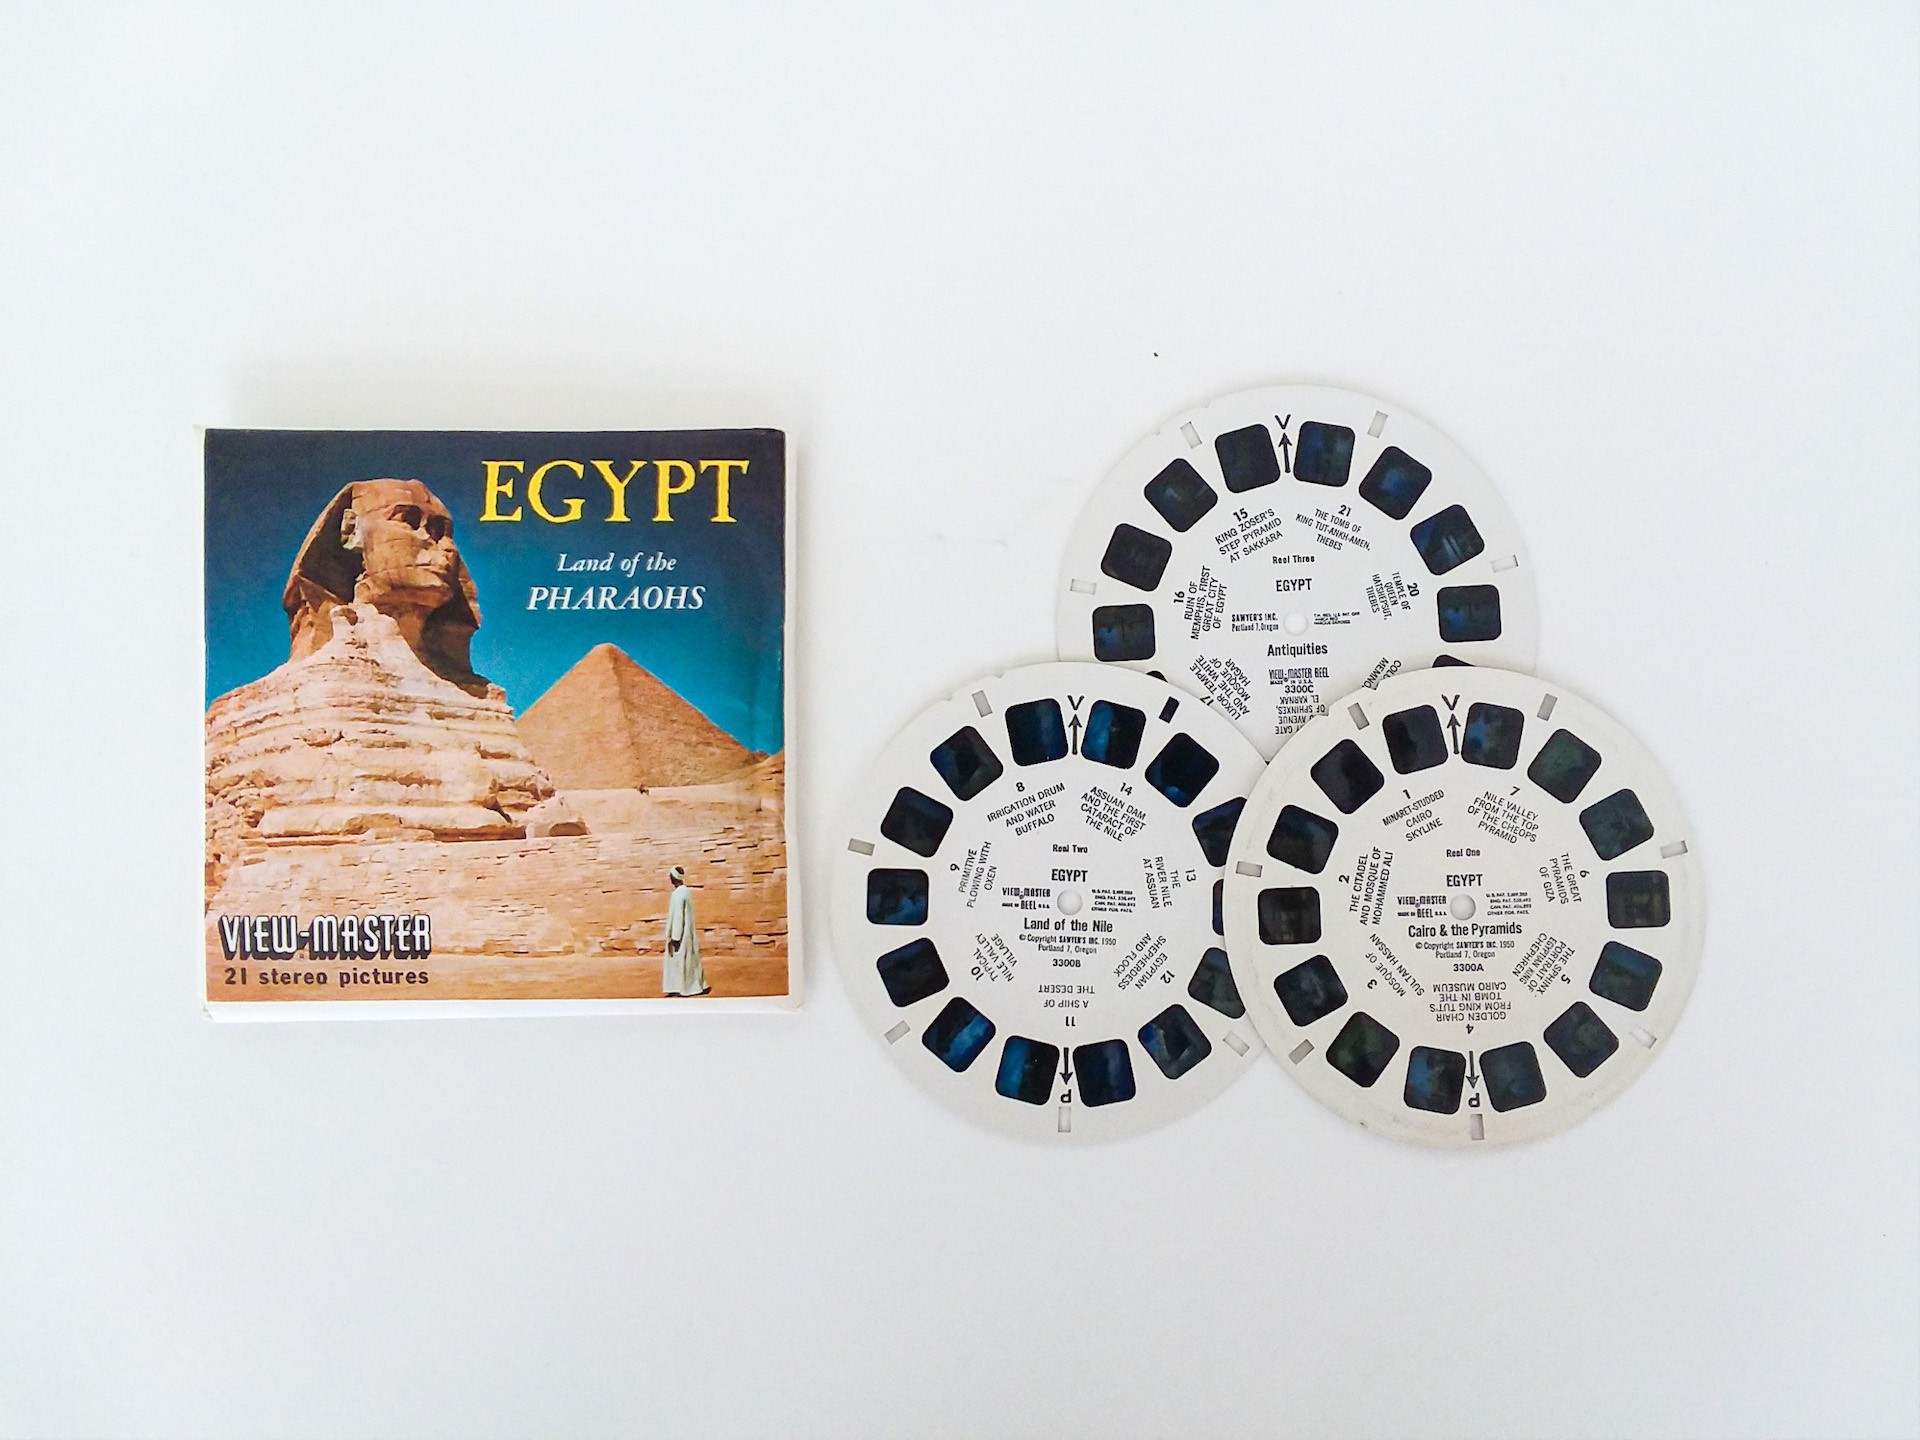 a View-Master reel series titled “Egypt: Land of the Pharaohs” with the three reels displayed to the right